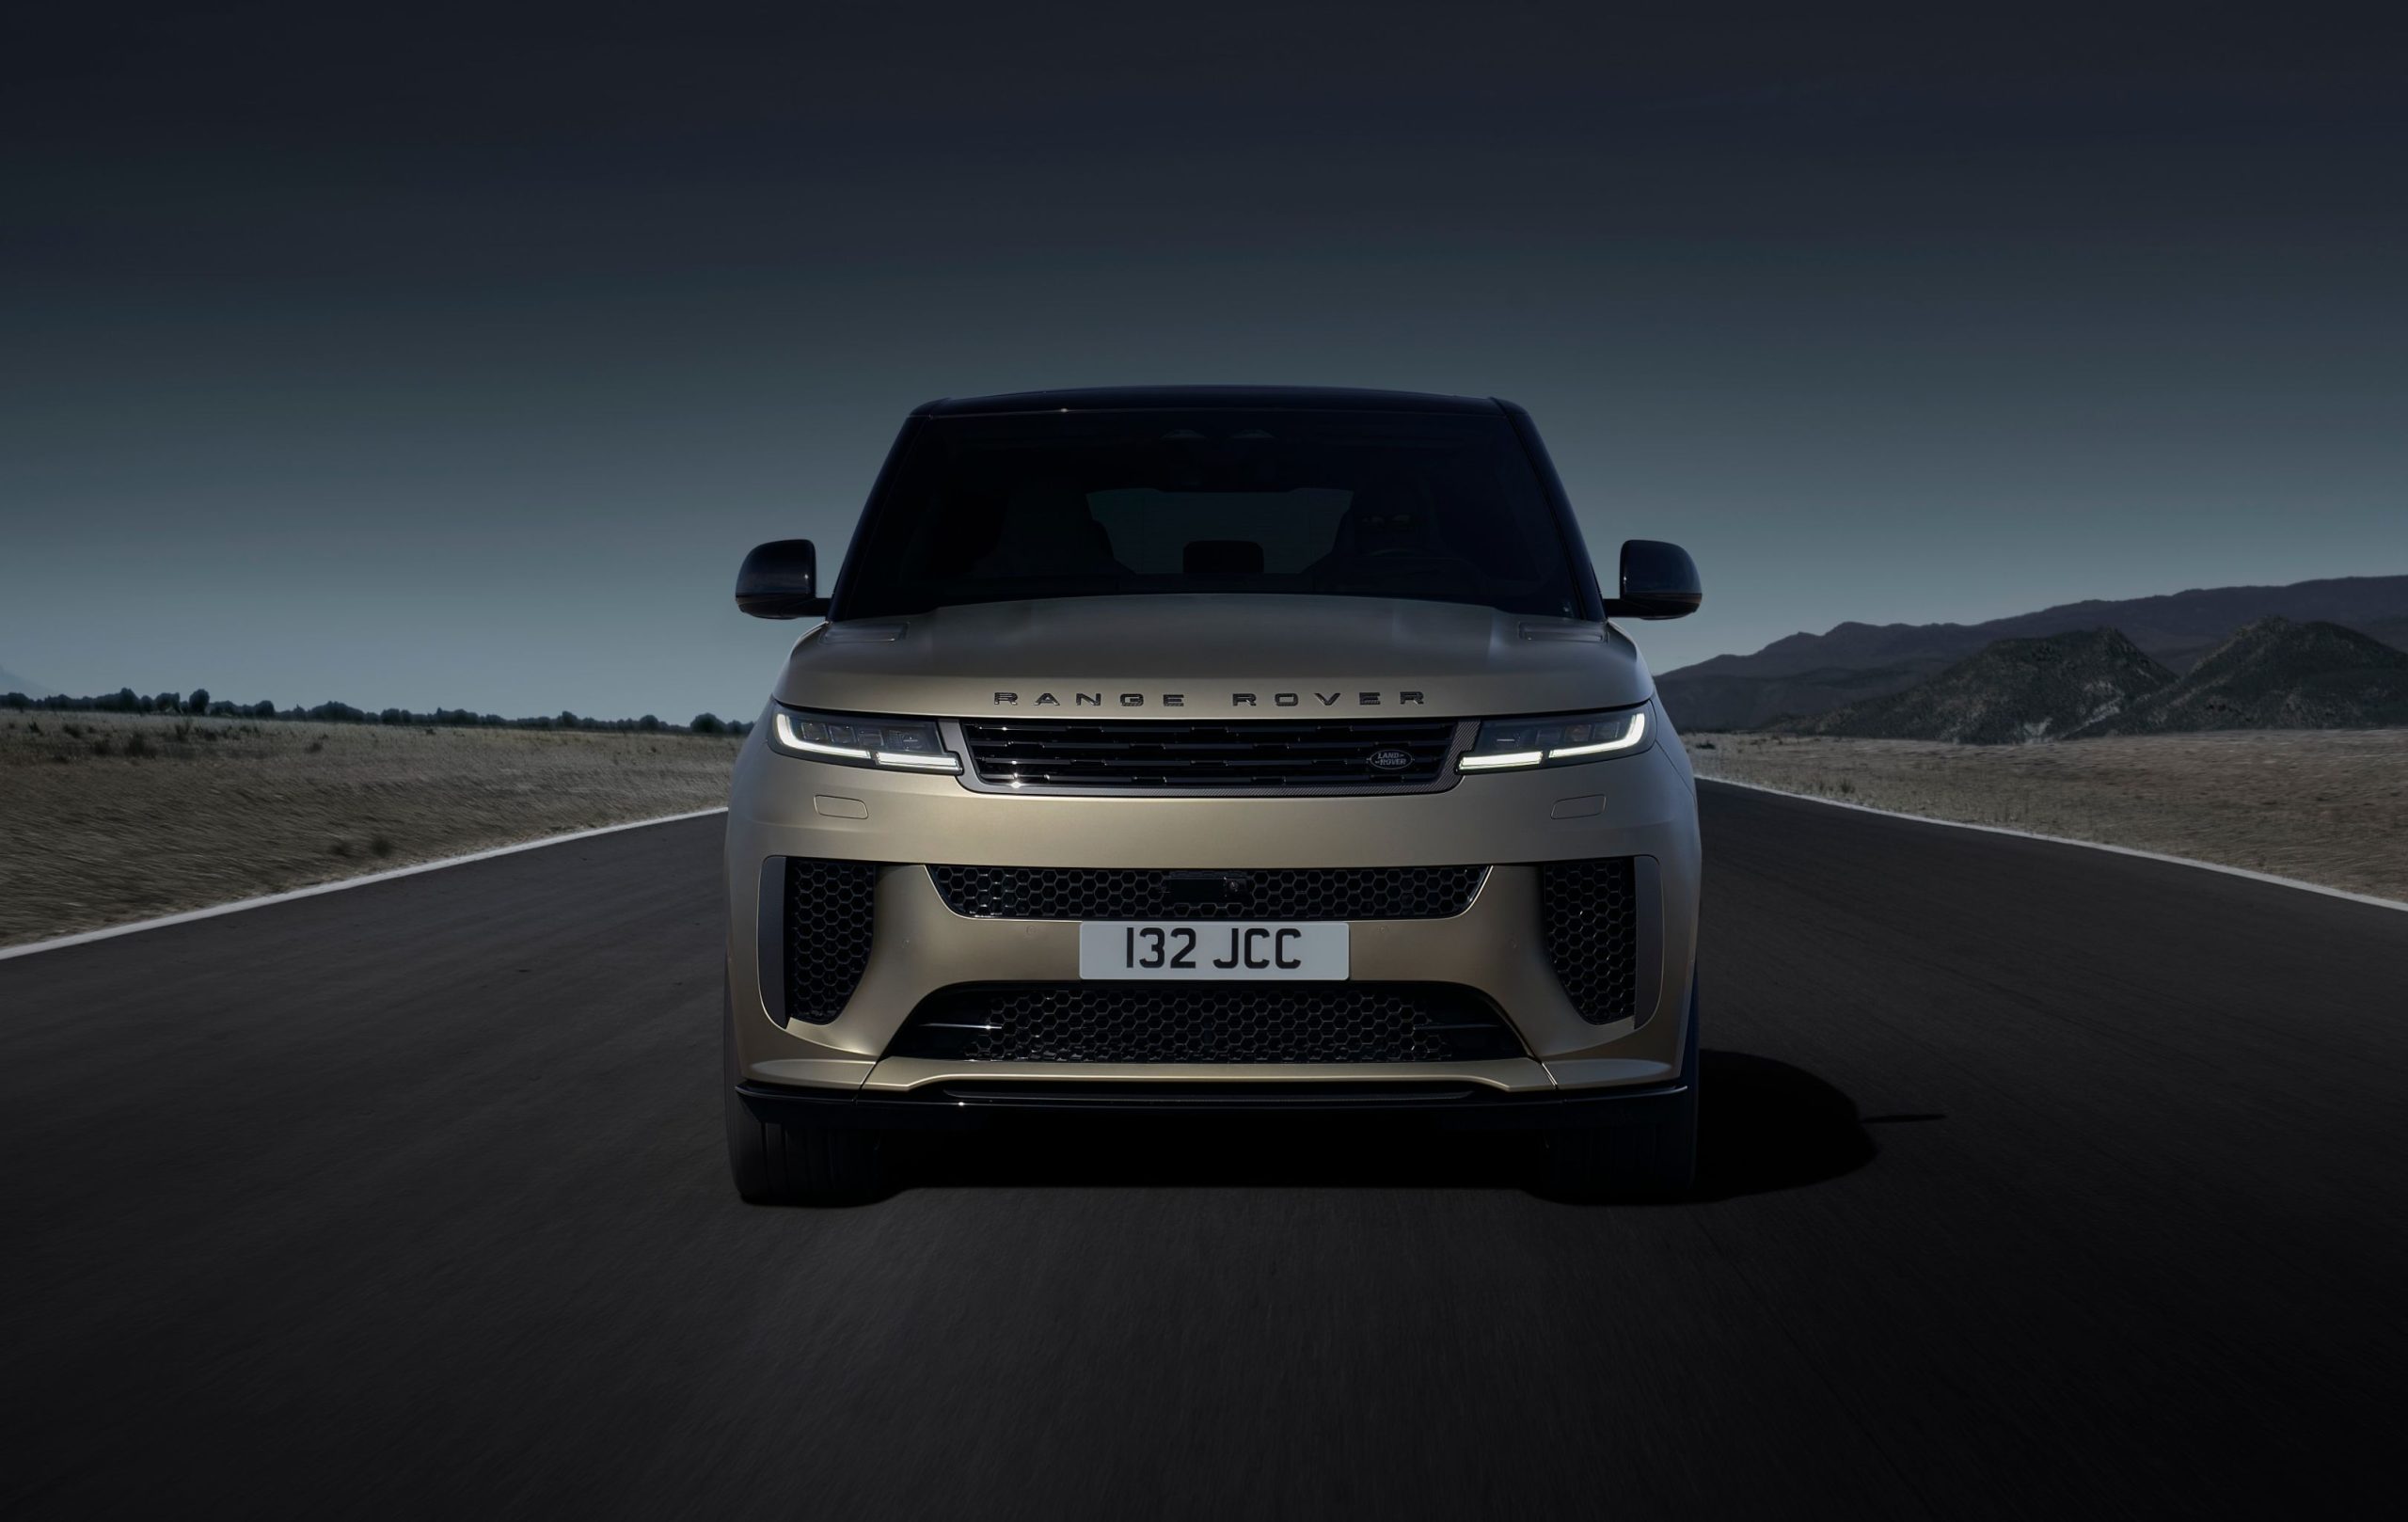 Refined Brutality: The Range Rover Sport SV Drives Up The Power